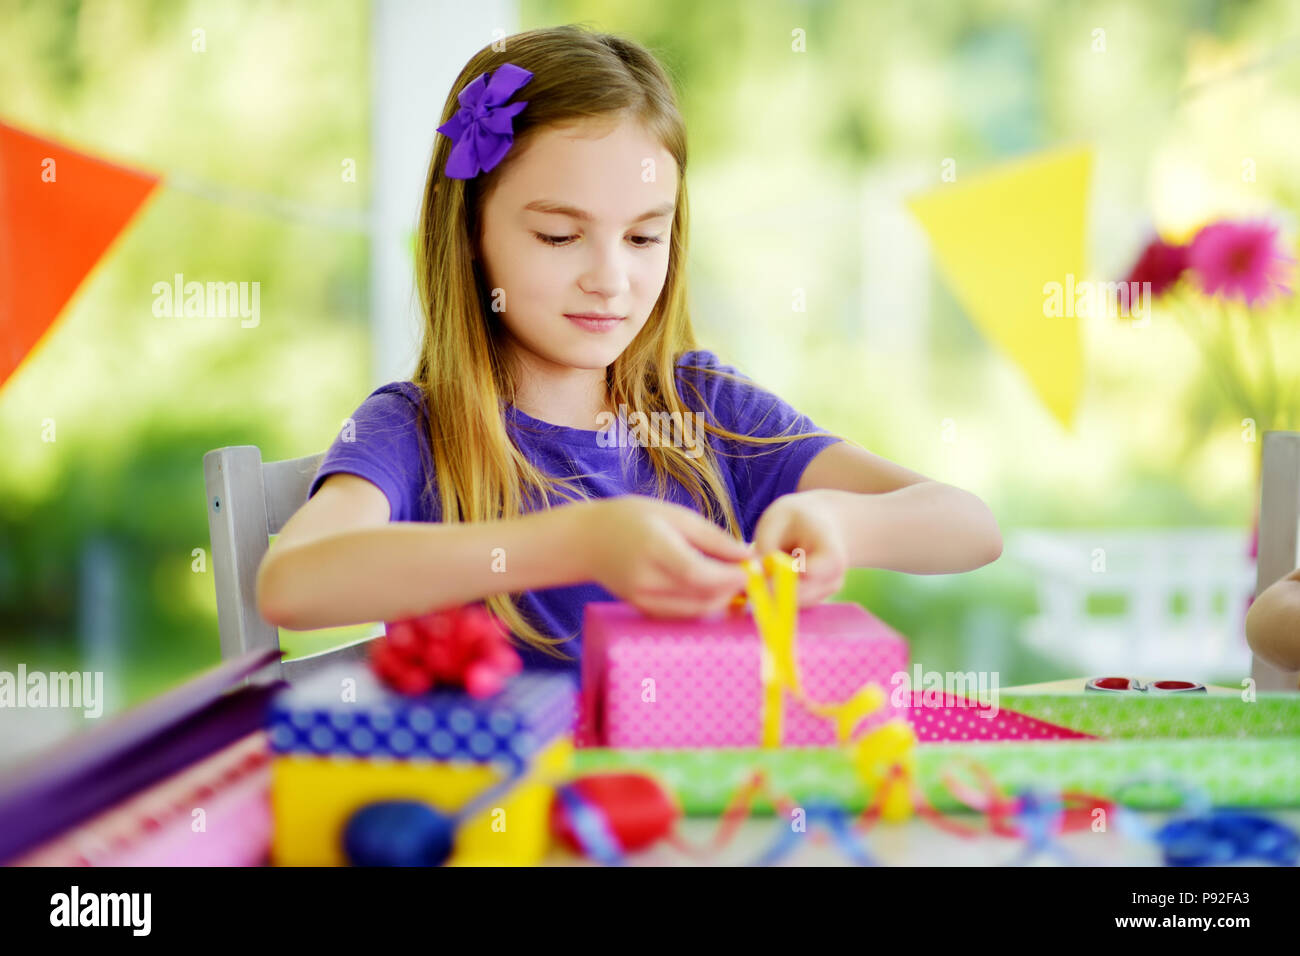 https://c8.alamy.com/comp/P92FA3/cute-preteen-girl-wrapping-gifts-in-colorful-wrapping-paper-adorable-child-wrapping-birthday-presents-family-fun-P92FA3.jpg